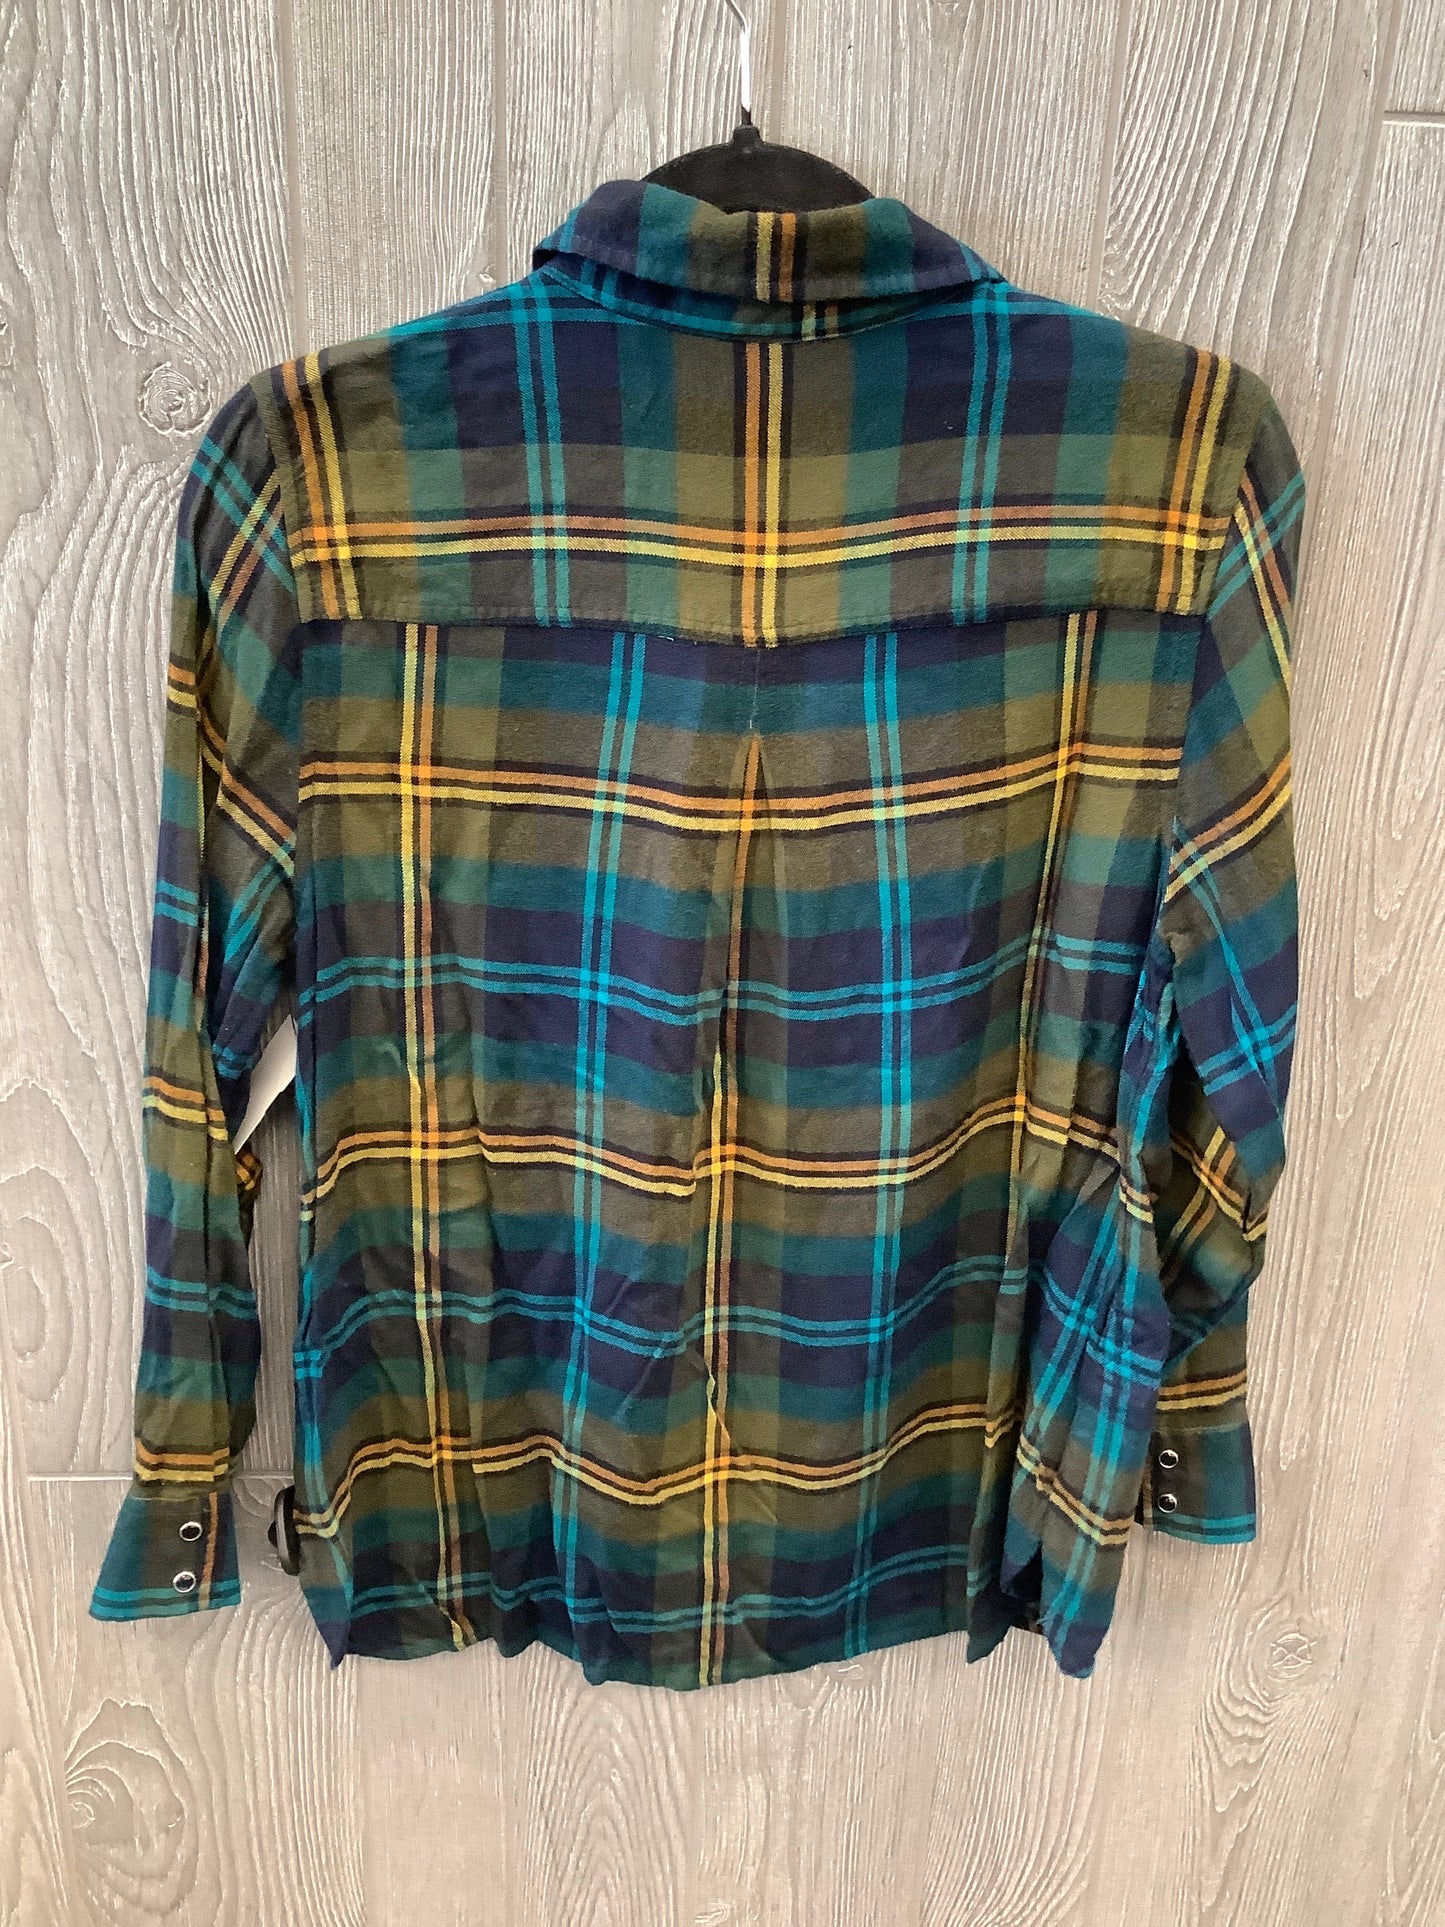 Plaid Pattern Top Long Sleeve Christopher And Banks, Size Petite  M